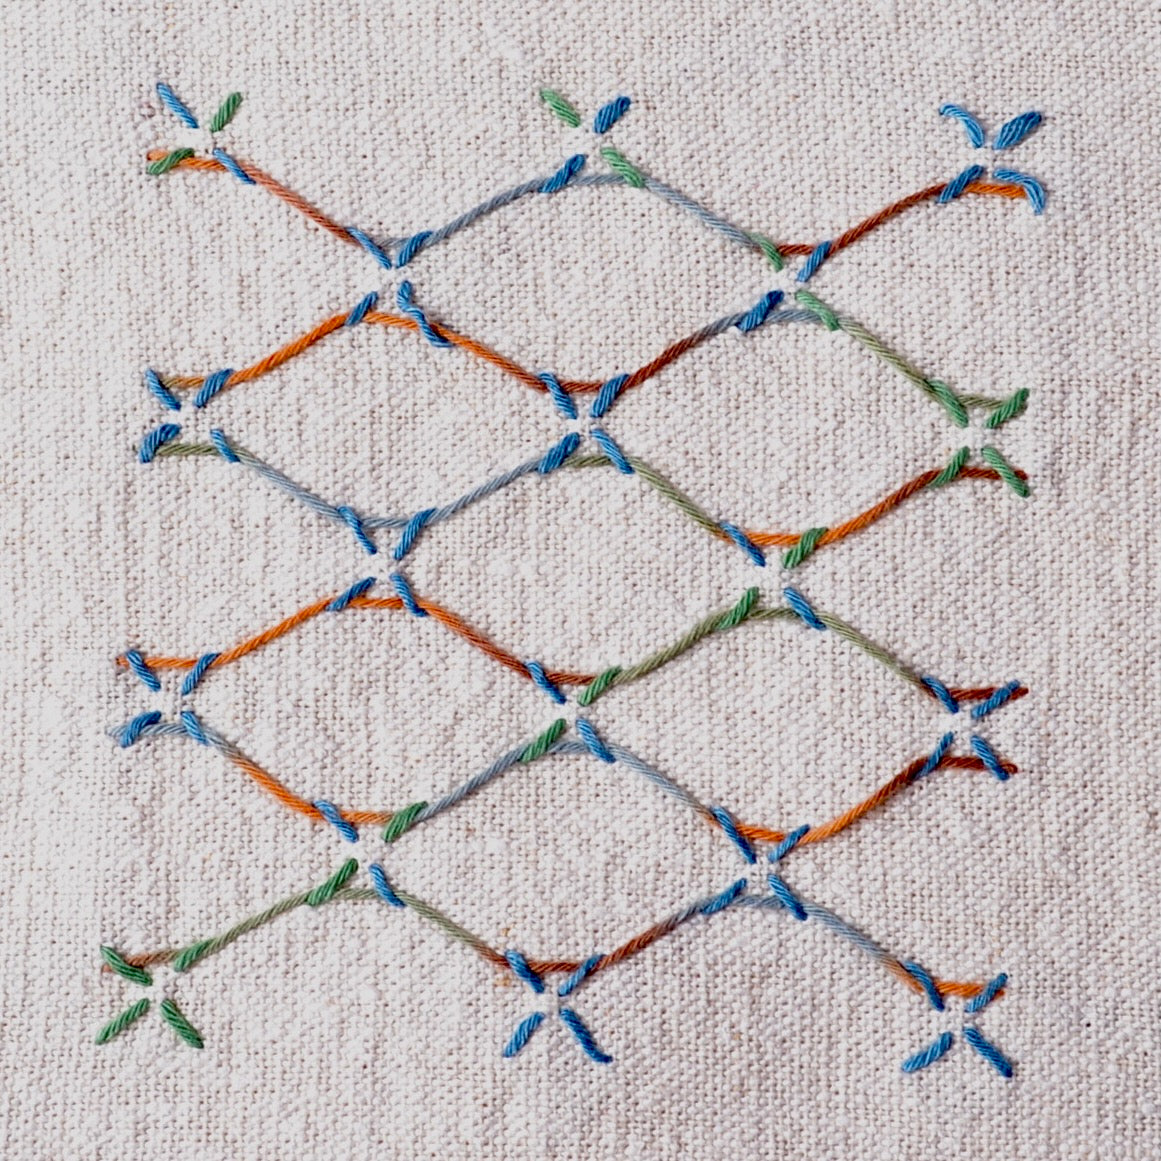 using only the crosses from the stencil, then weaving a variegated thread through those crosses  to get a Kuguri stitching